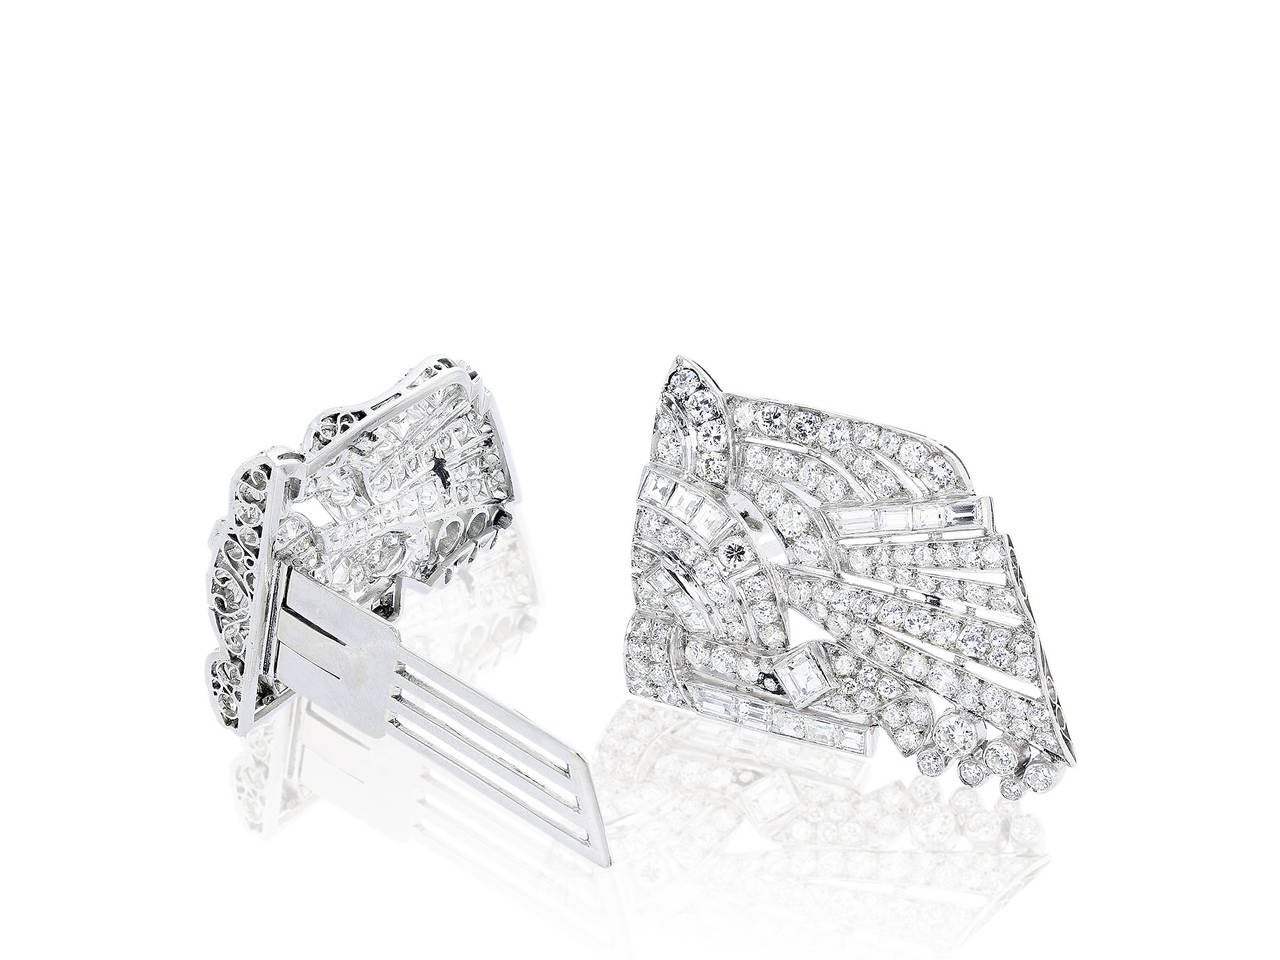 Platinum Art Deco Geometric motif clips and pin consisting of full cut, square and baguette diamonds having an estimated total weight of 12.00 carats.